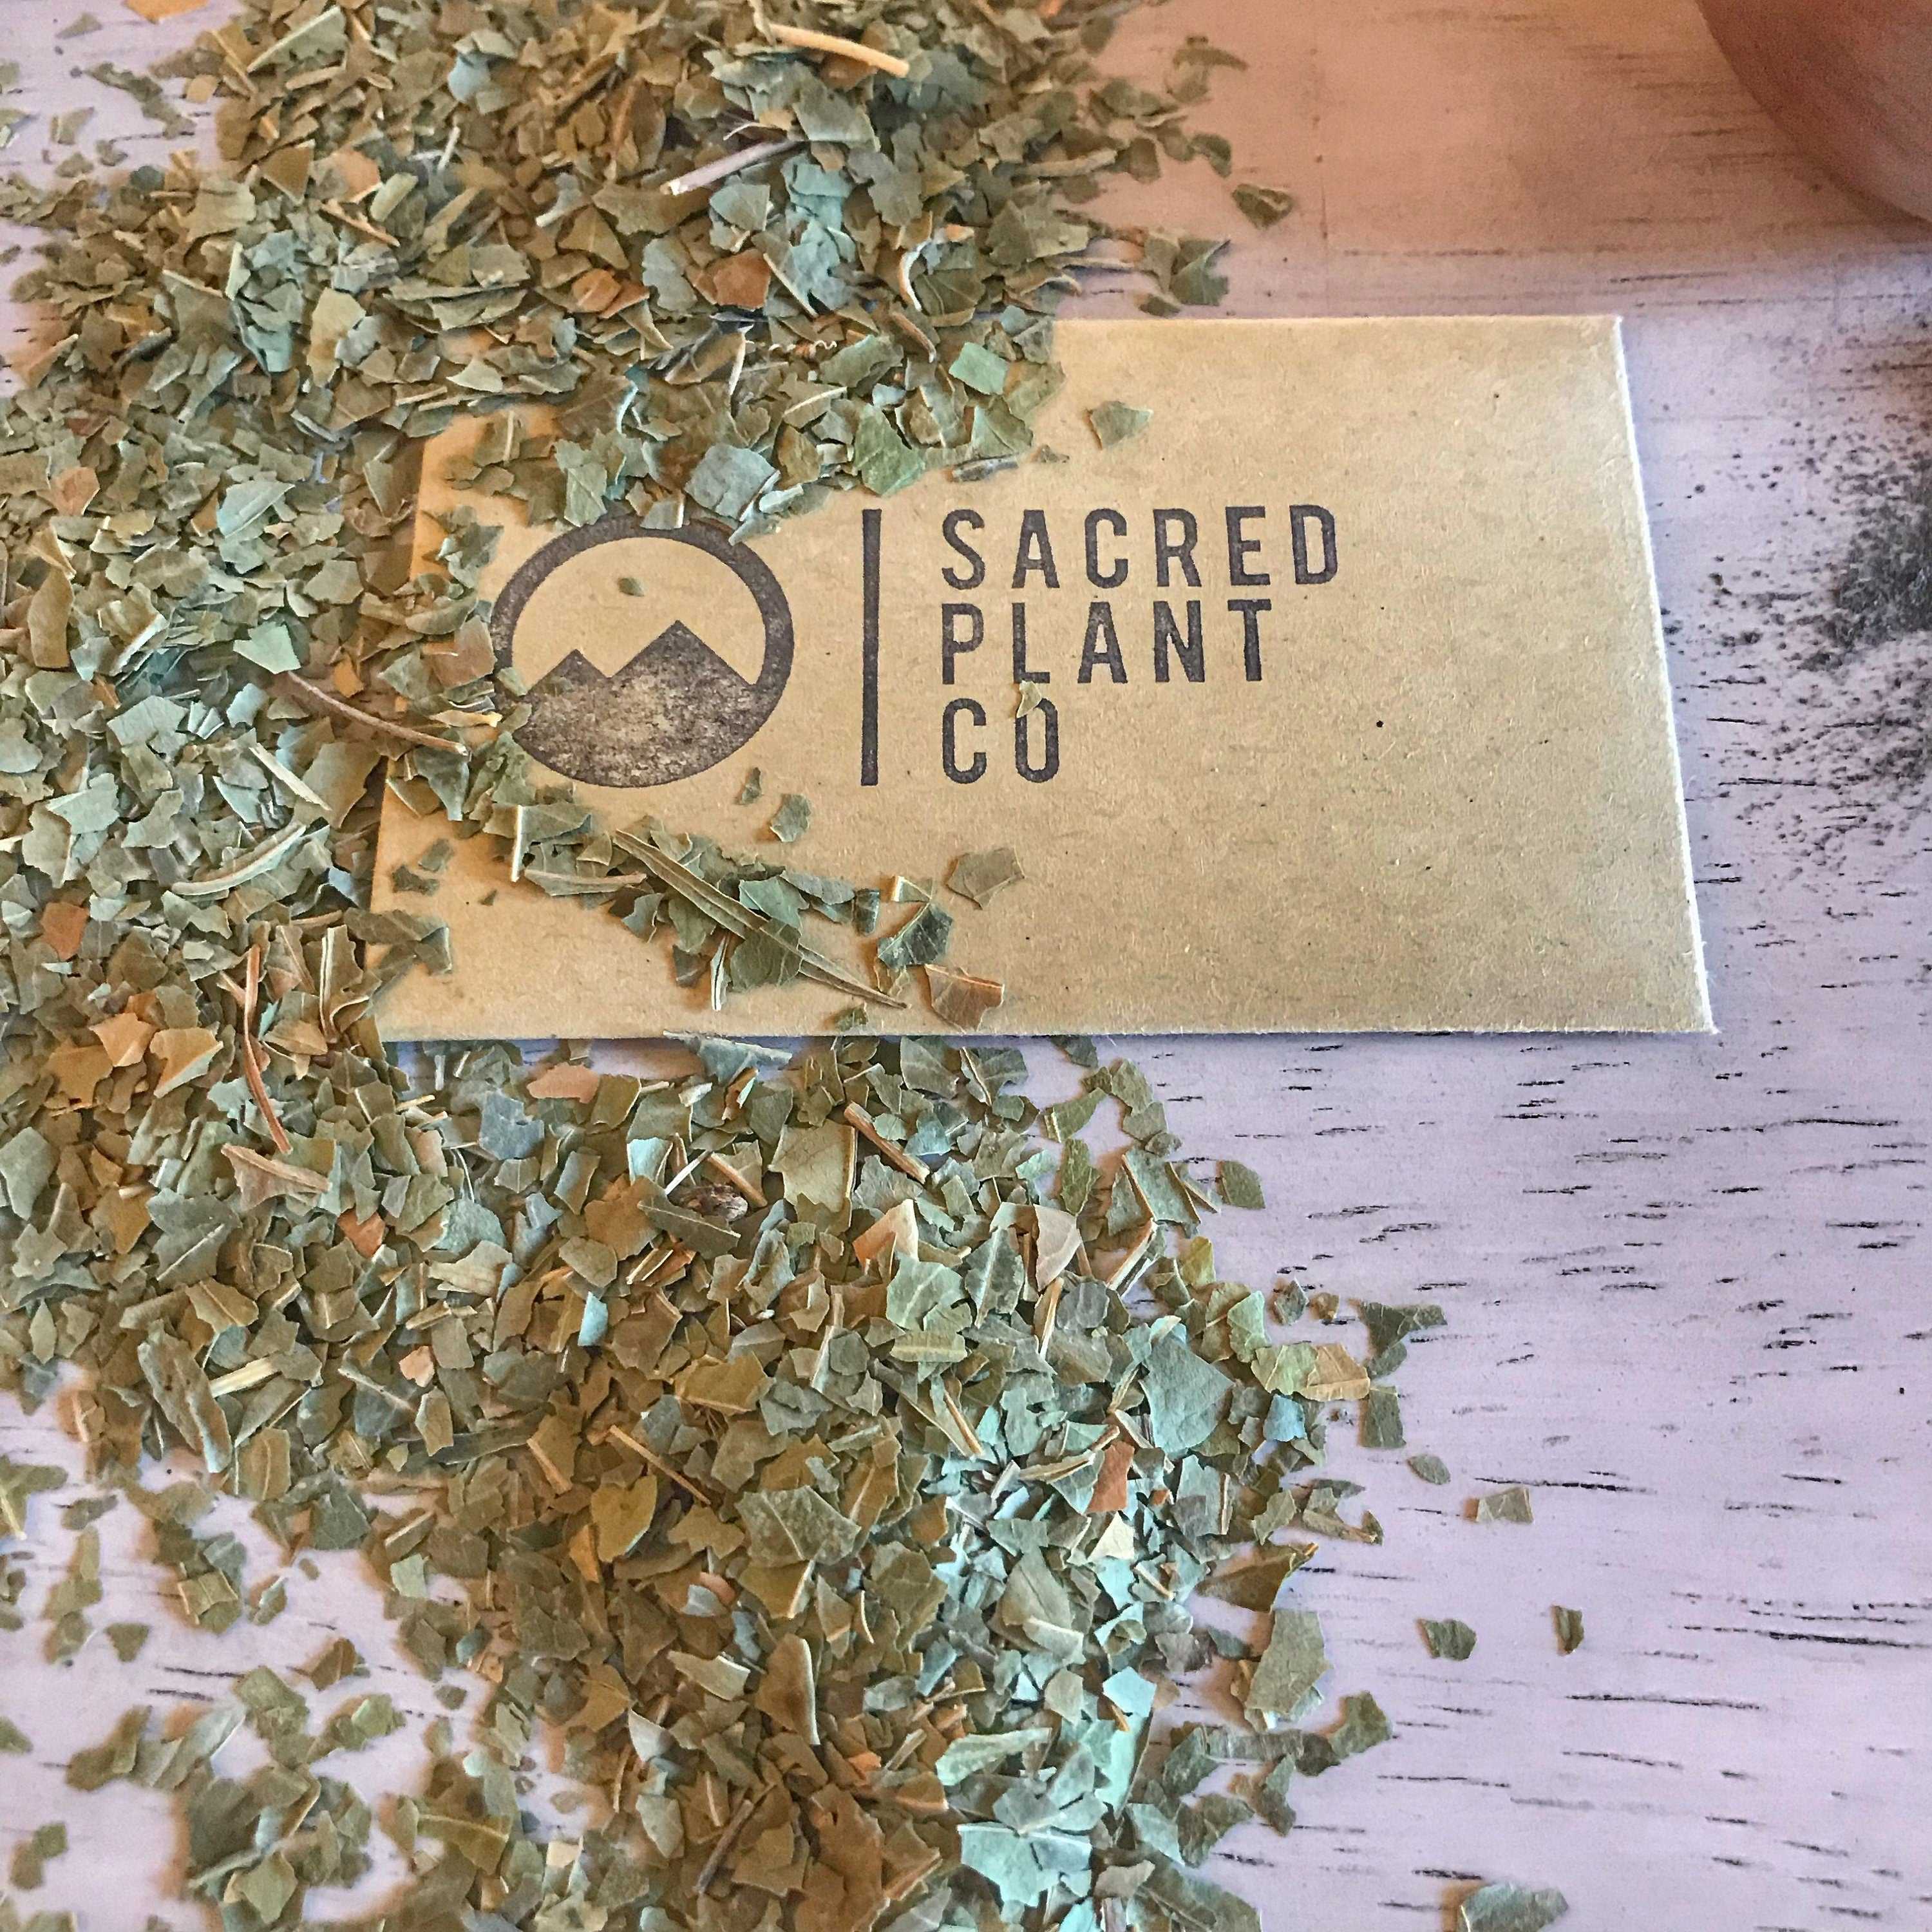 A close-up of dried neem leaves scattered across a white wooden surface, partially covering a golden business card for Sacred Plant Co with their mountain logo, showcasing the natural ingredients used in their products.uthentic Ayurvedic Facial Care Face &amp; Body All Sacred Plant Co